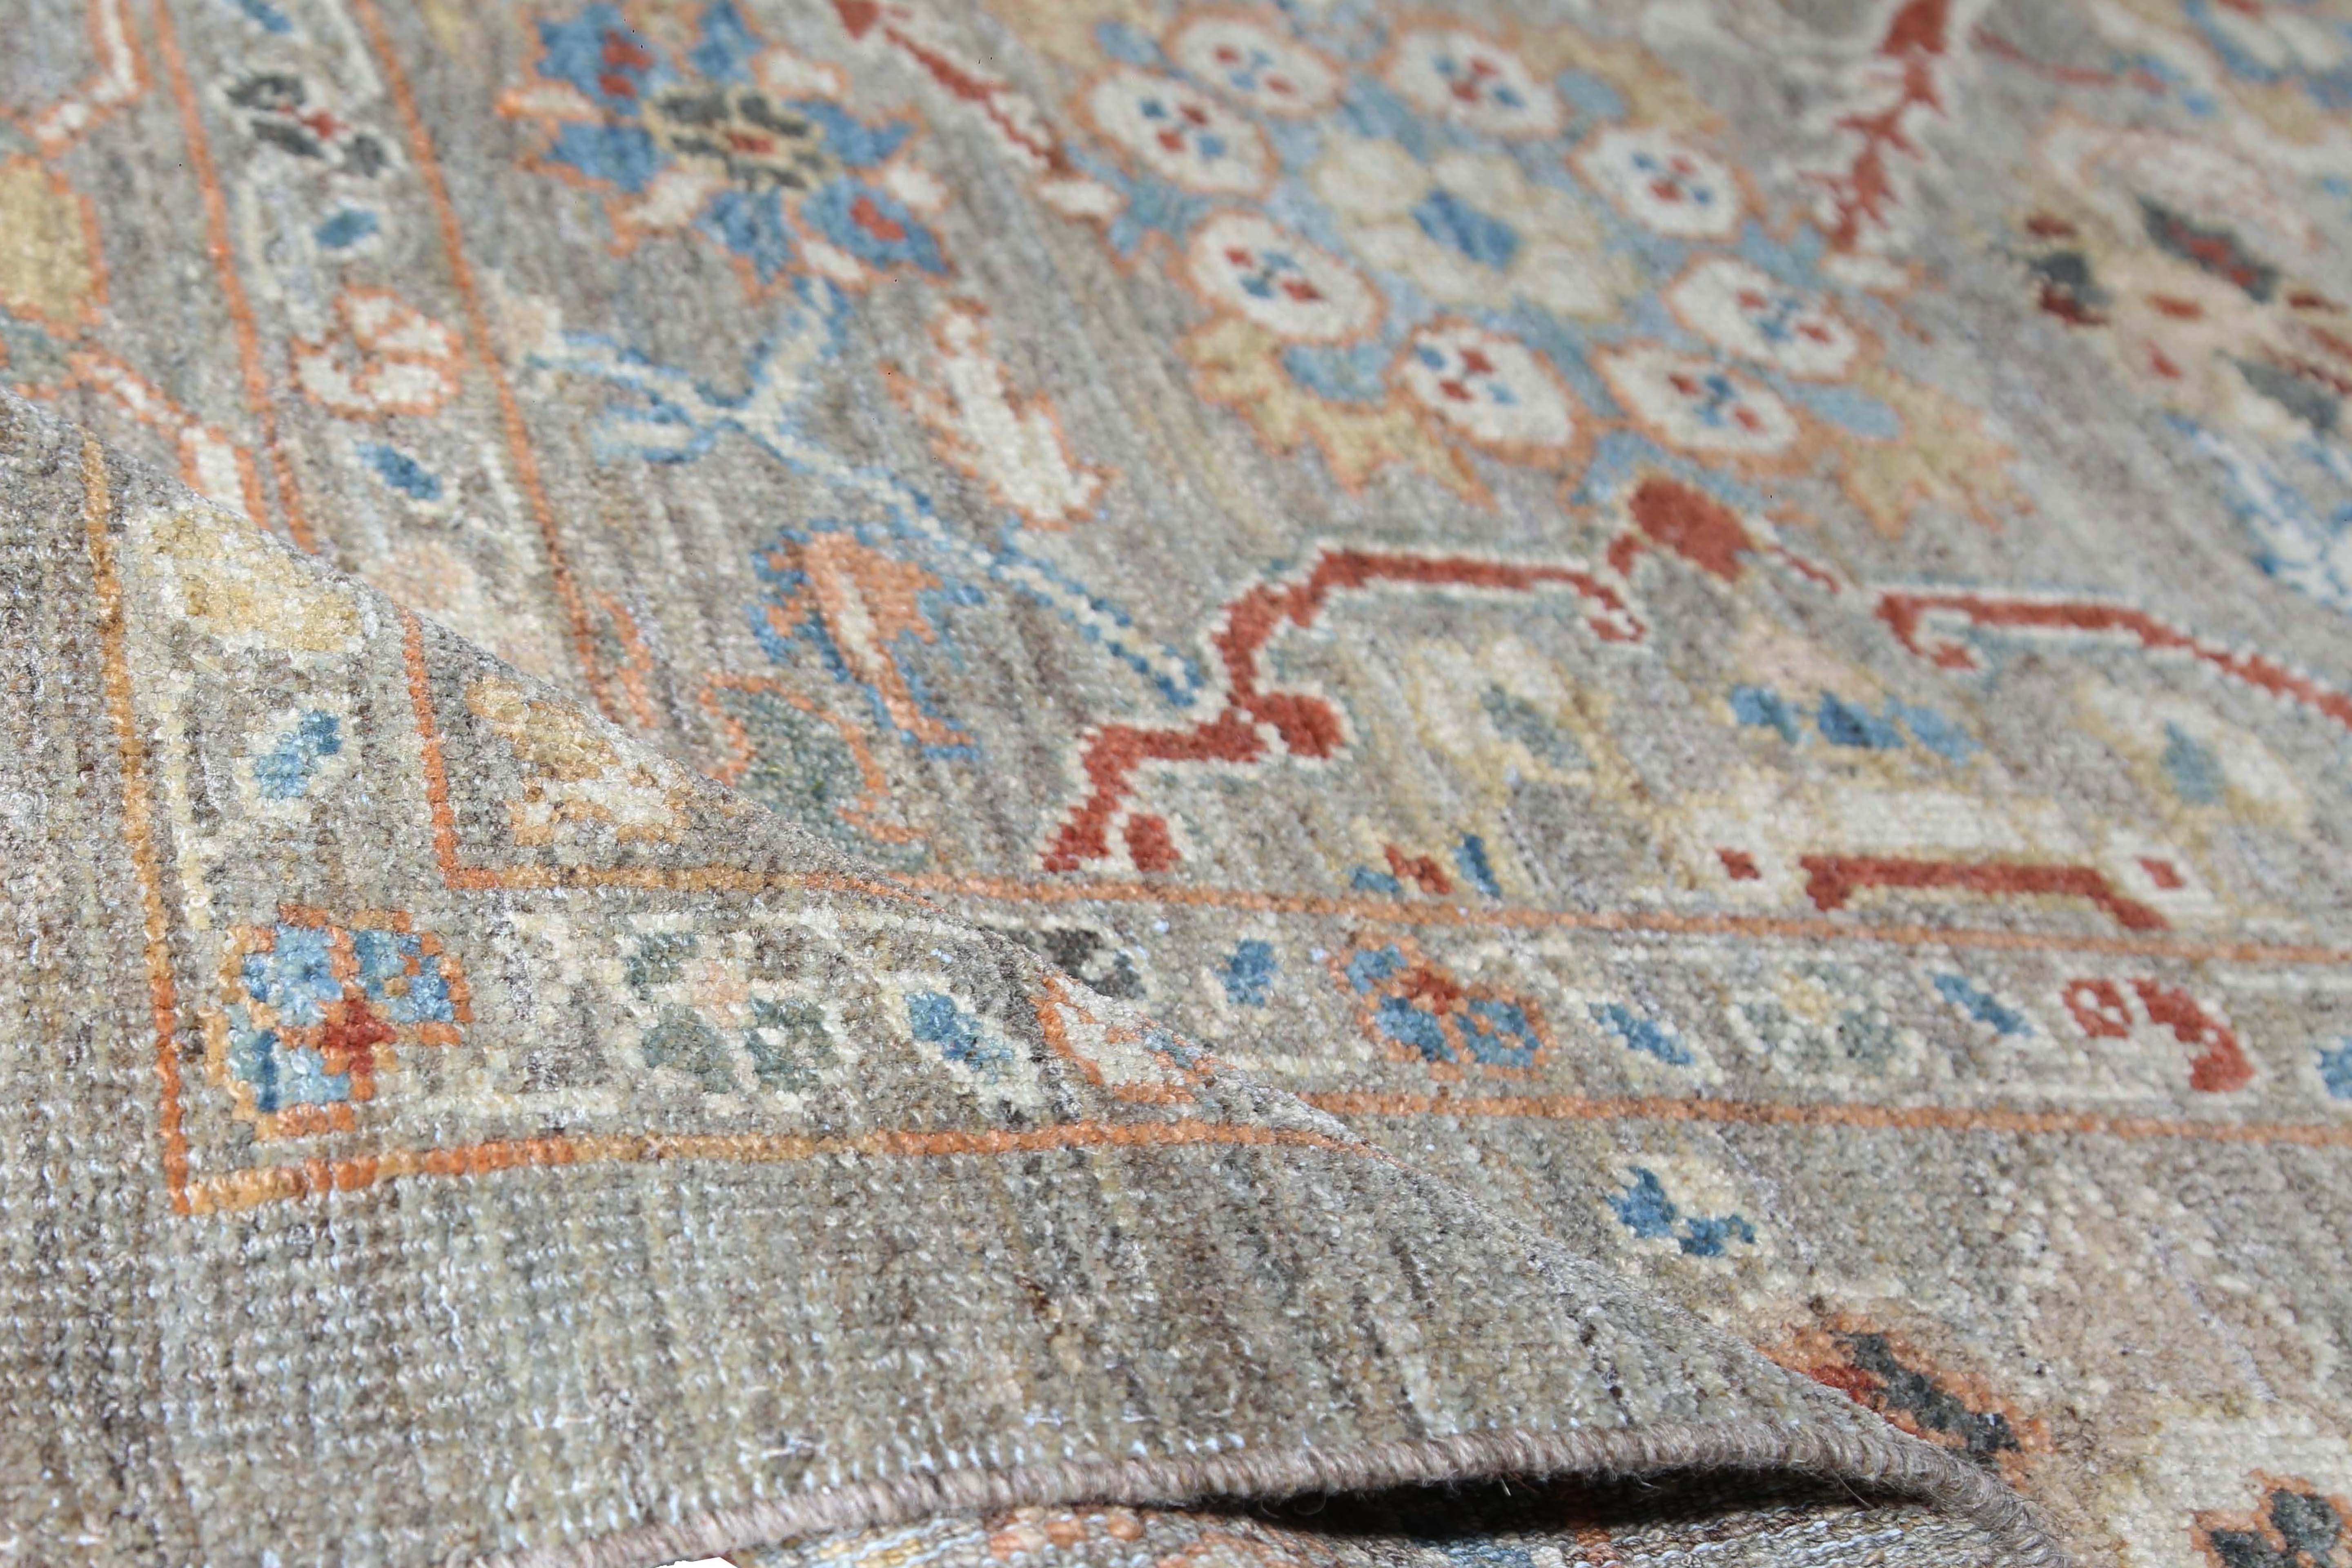 Introducing our exquisite handmade Sultanabad rug from Turkey, measuring 9'5'' by 12'8''. This traditional style rug features a stunning mix of light grey and brown in the background, with pops of rusty red, light blue, orange, and yellow in the